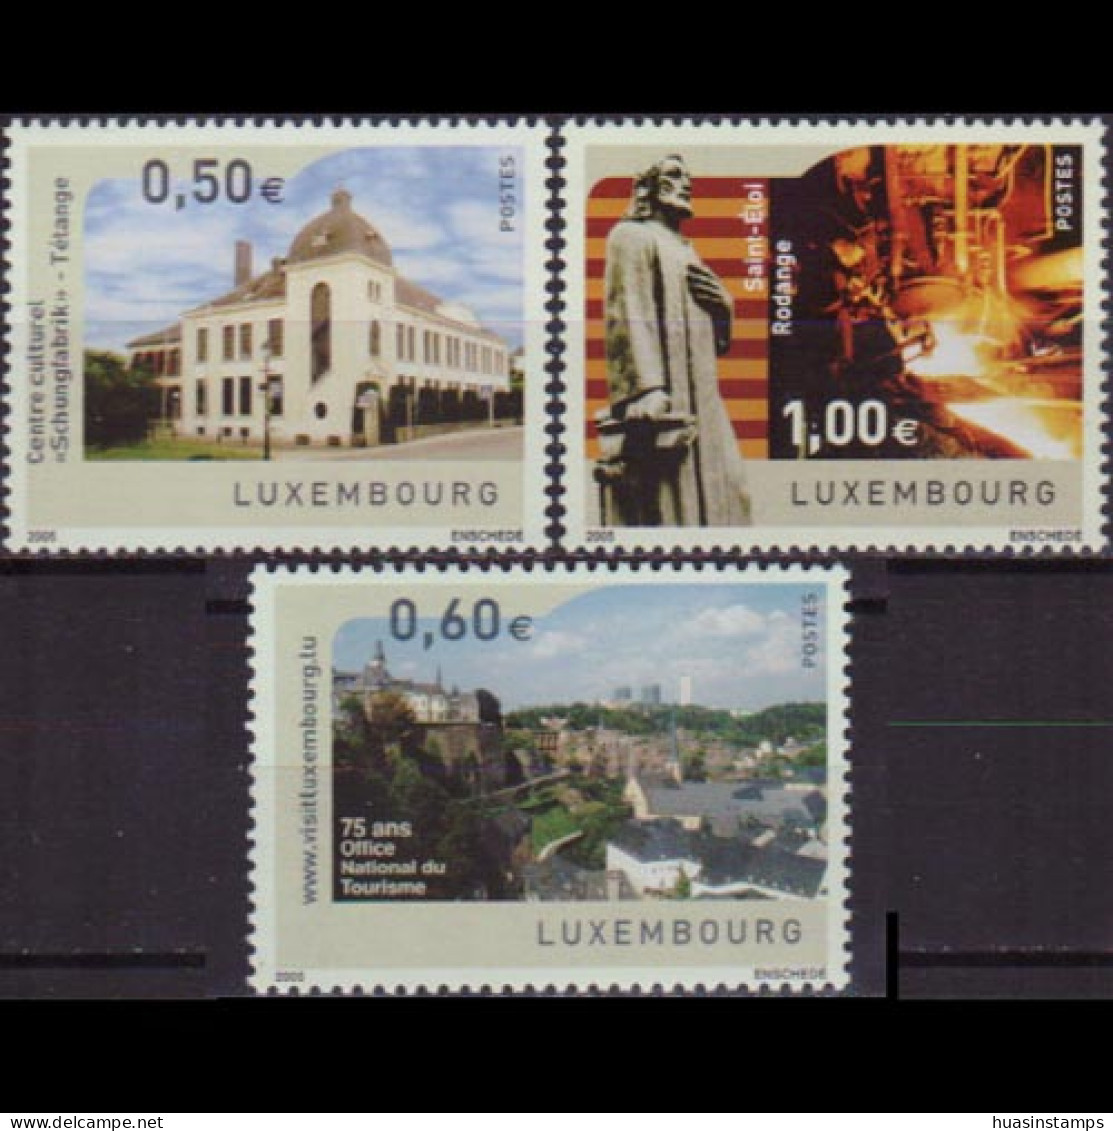 LUXEMBOURG 2005 - Scott# 1158-60 Tourism Set Of 3 MNH - Unused Stamps